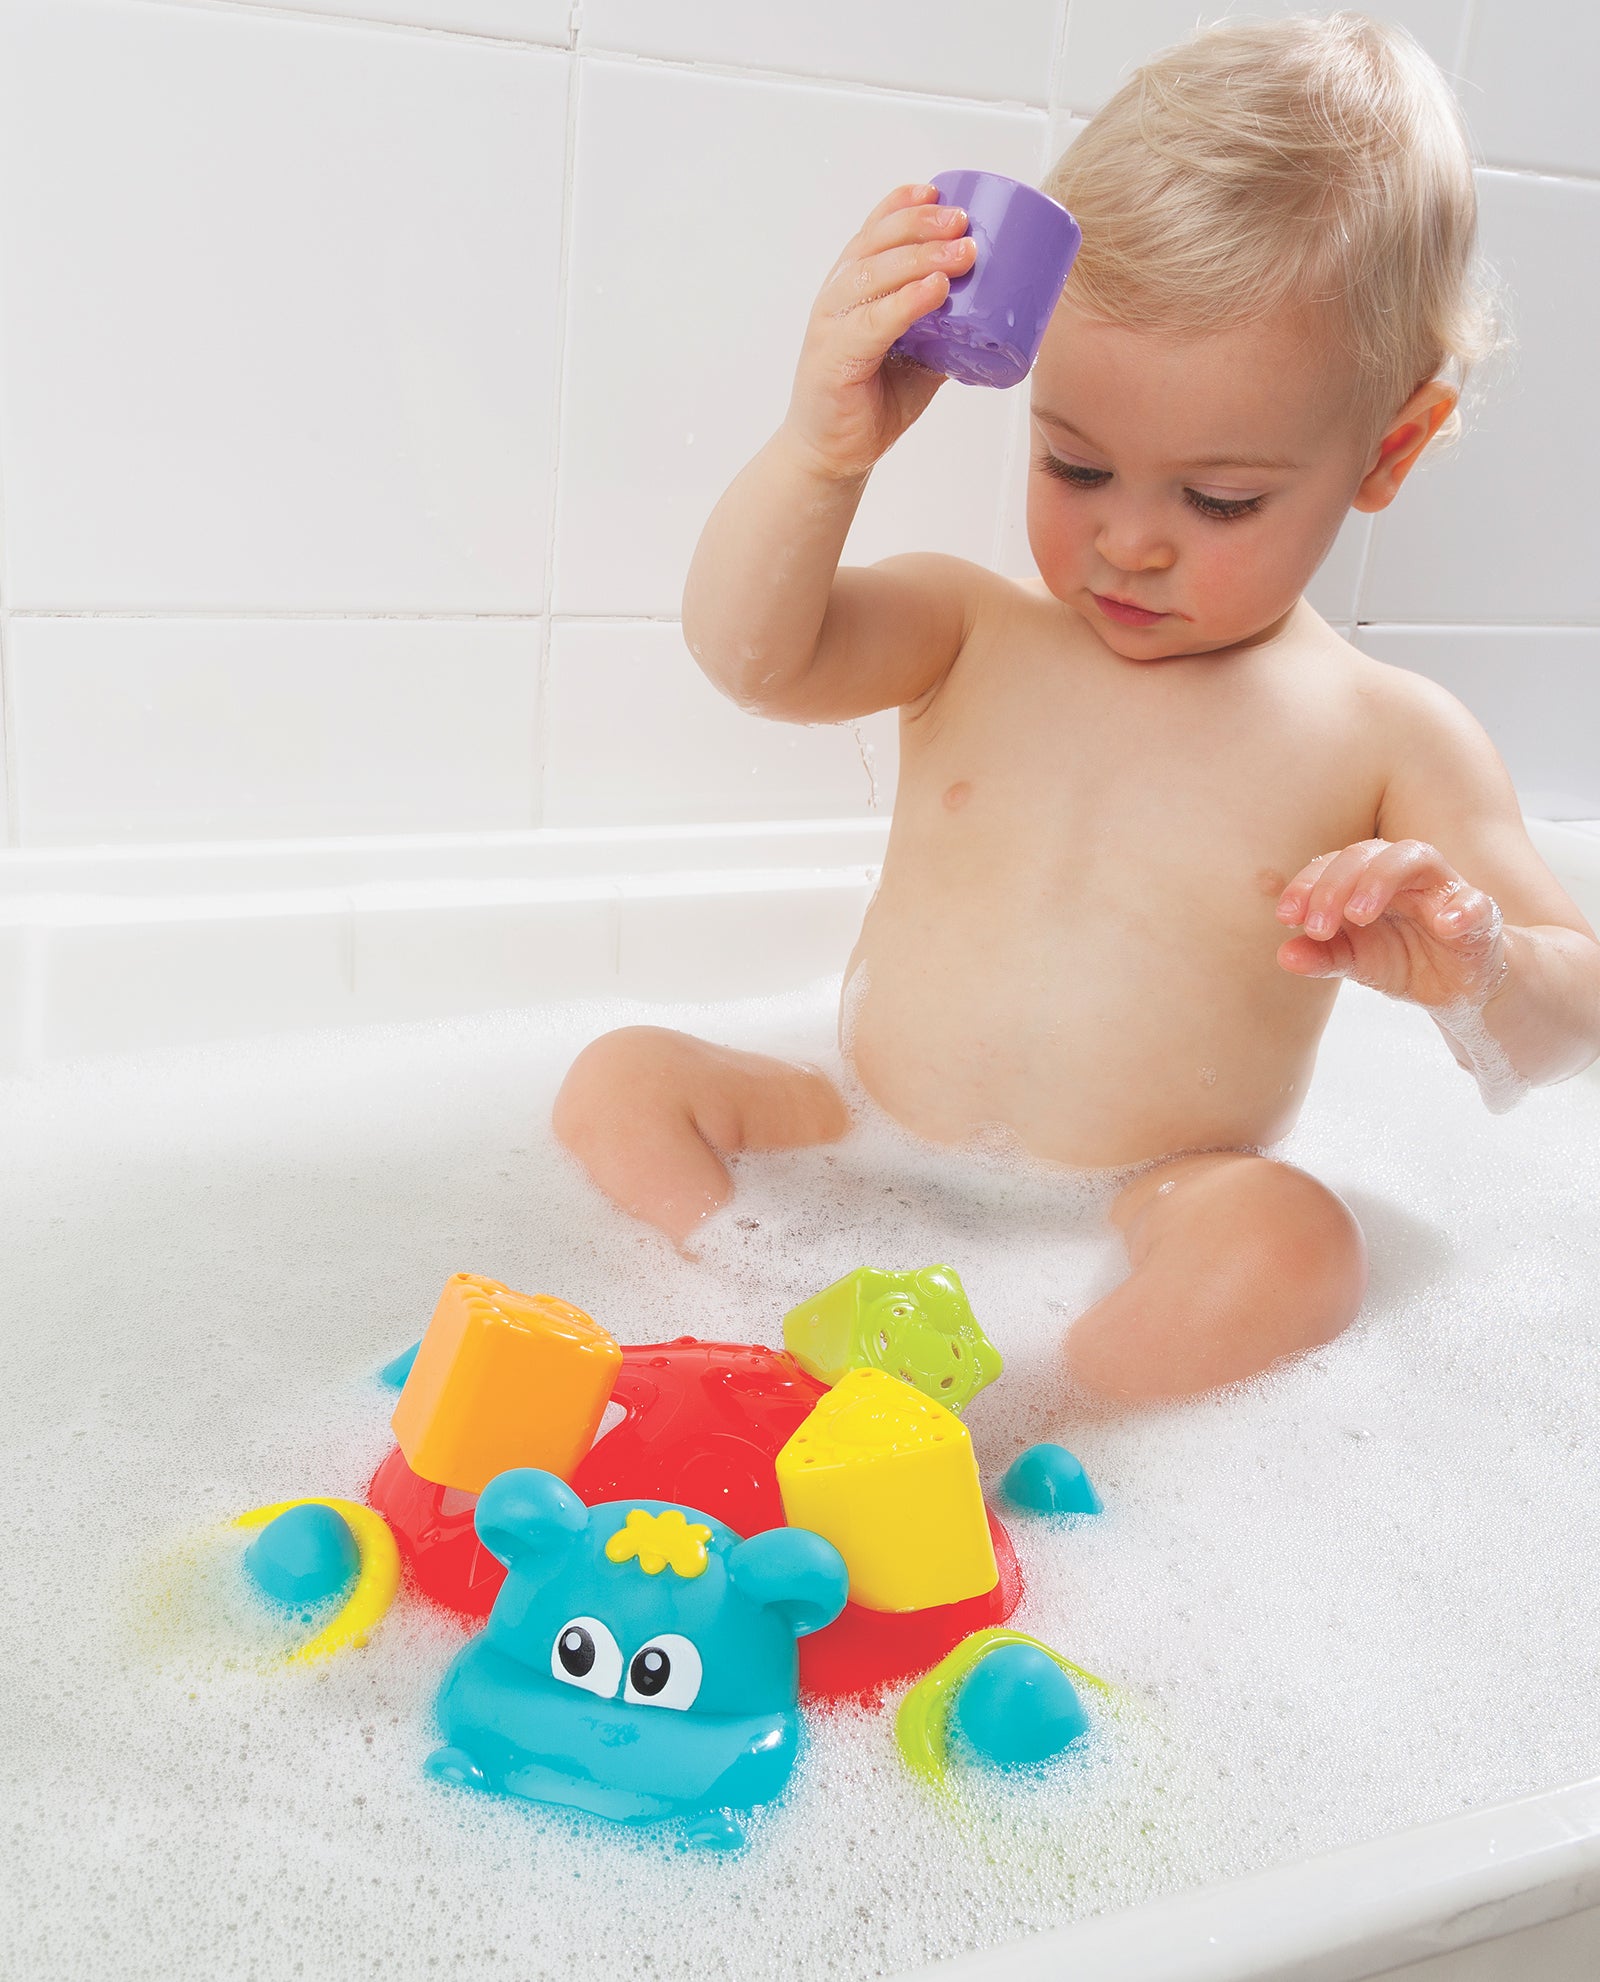 Sort N Stack Floating Hippo Playgro